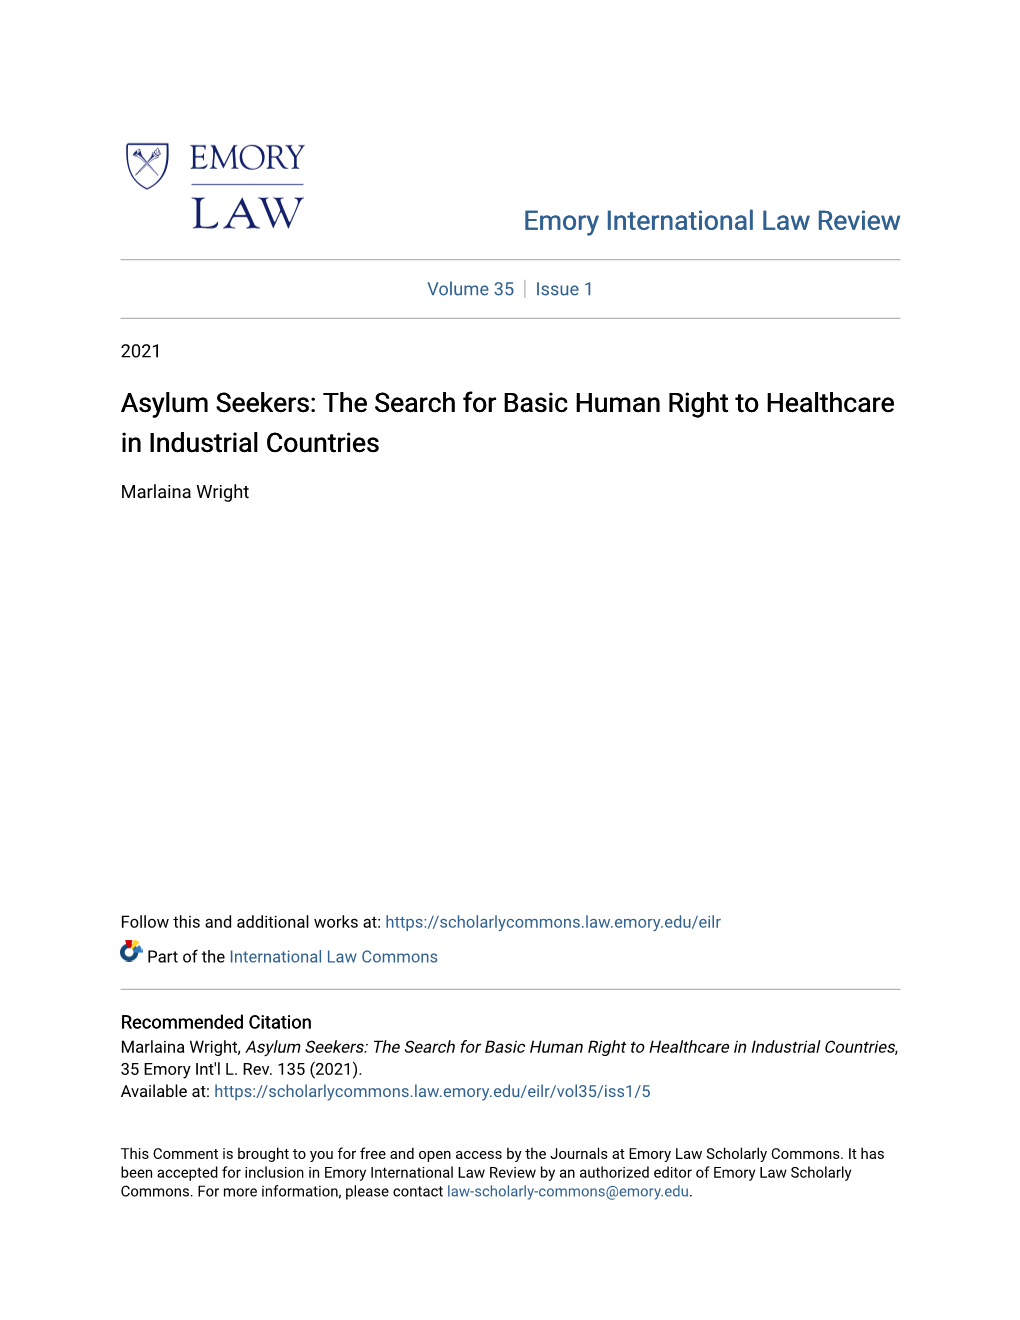 Asylum Seekers: the Search for Basic Human Right to Healthcare in Industrial Countries